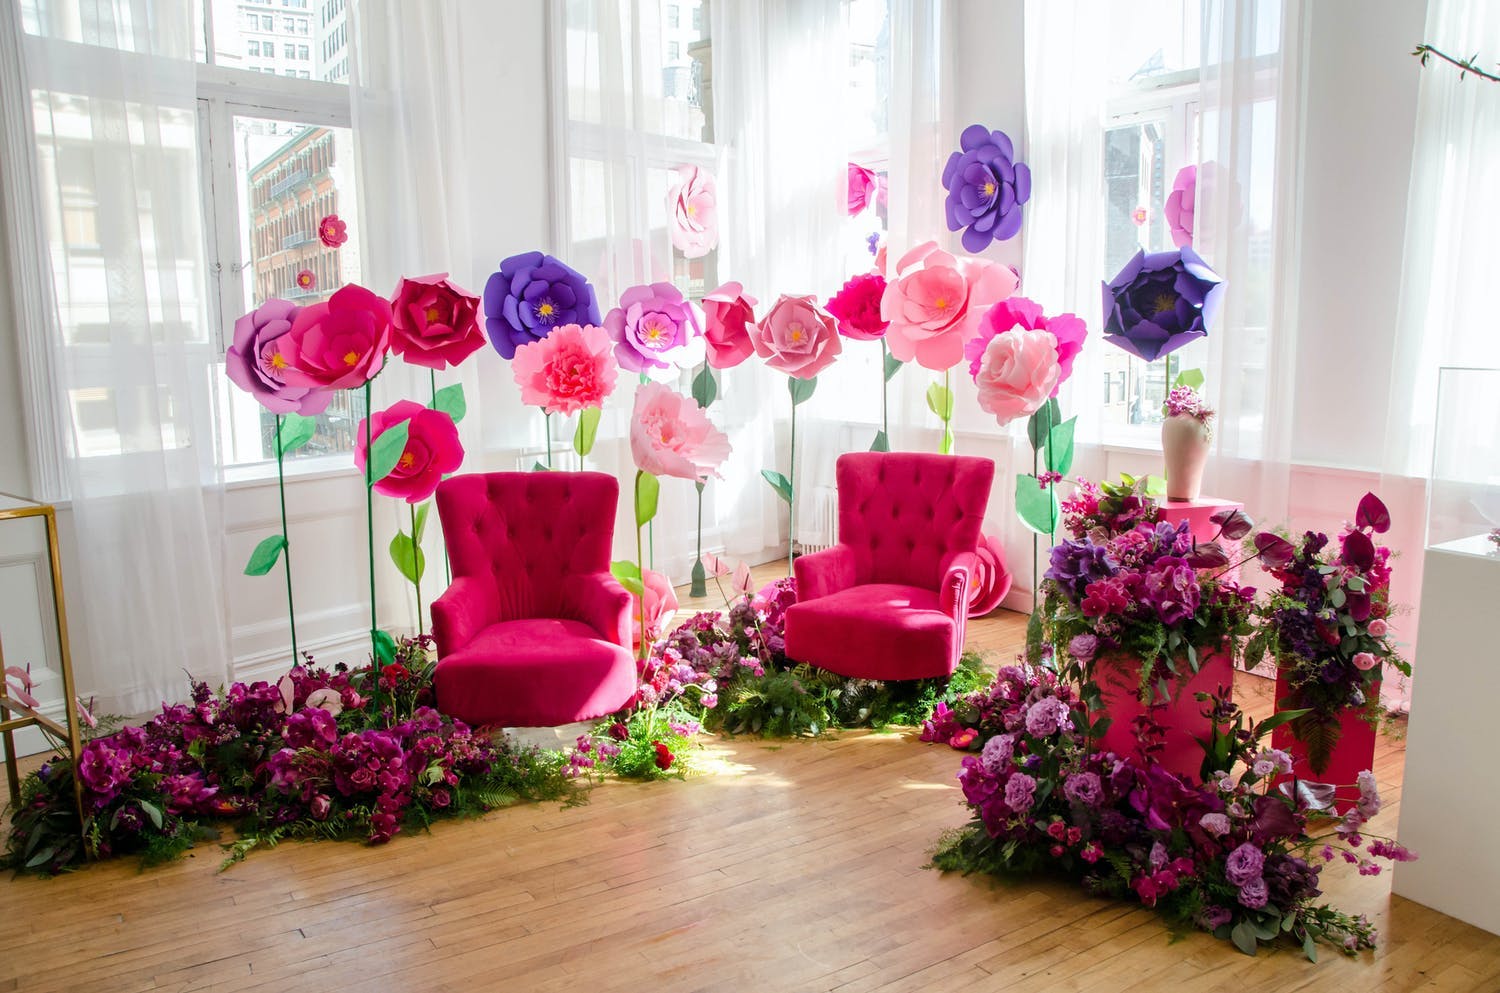 Media event with photo op area featuring two bright pink sofa chairs and giant pink, purple, and red paper flowers | PartySlate